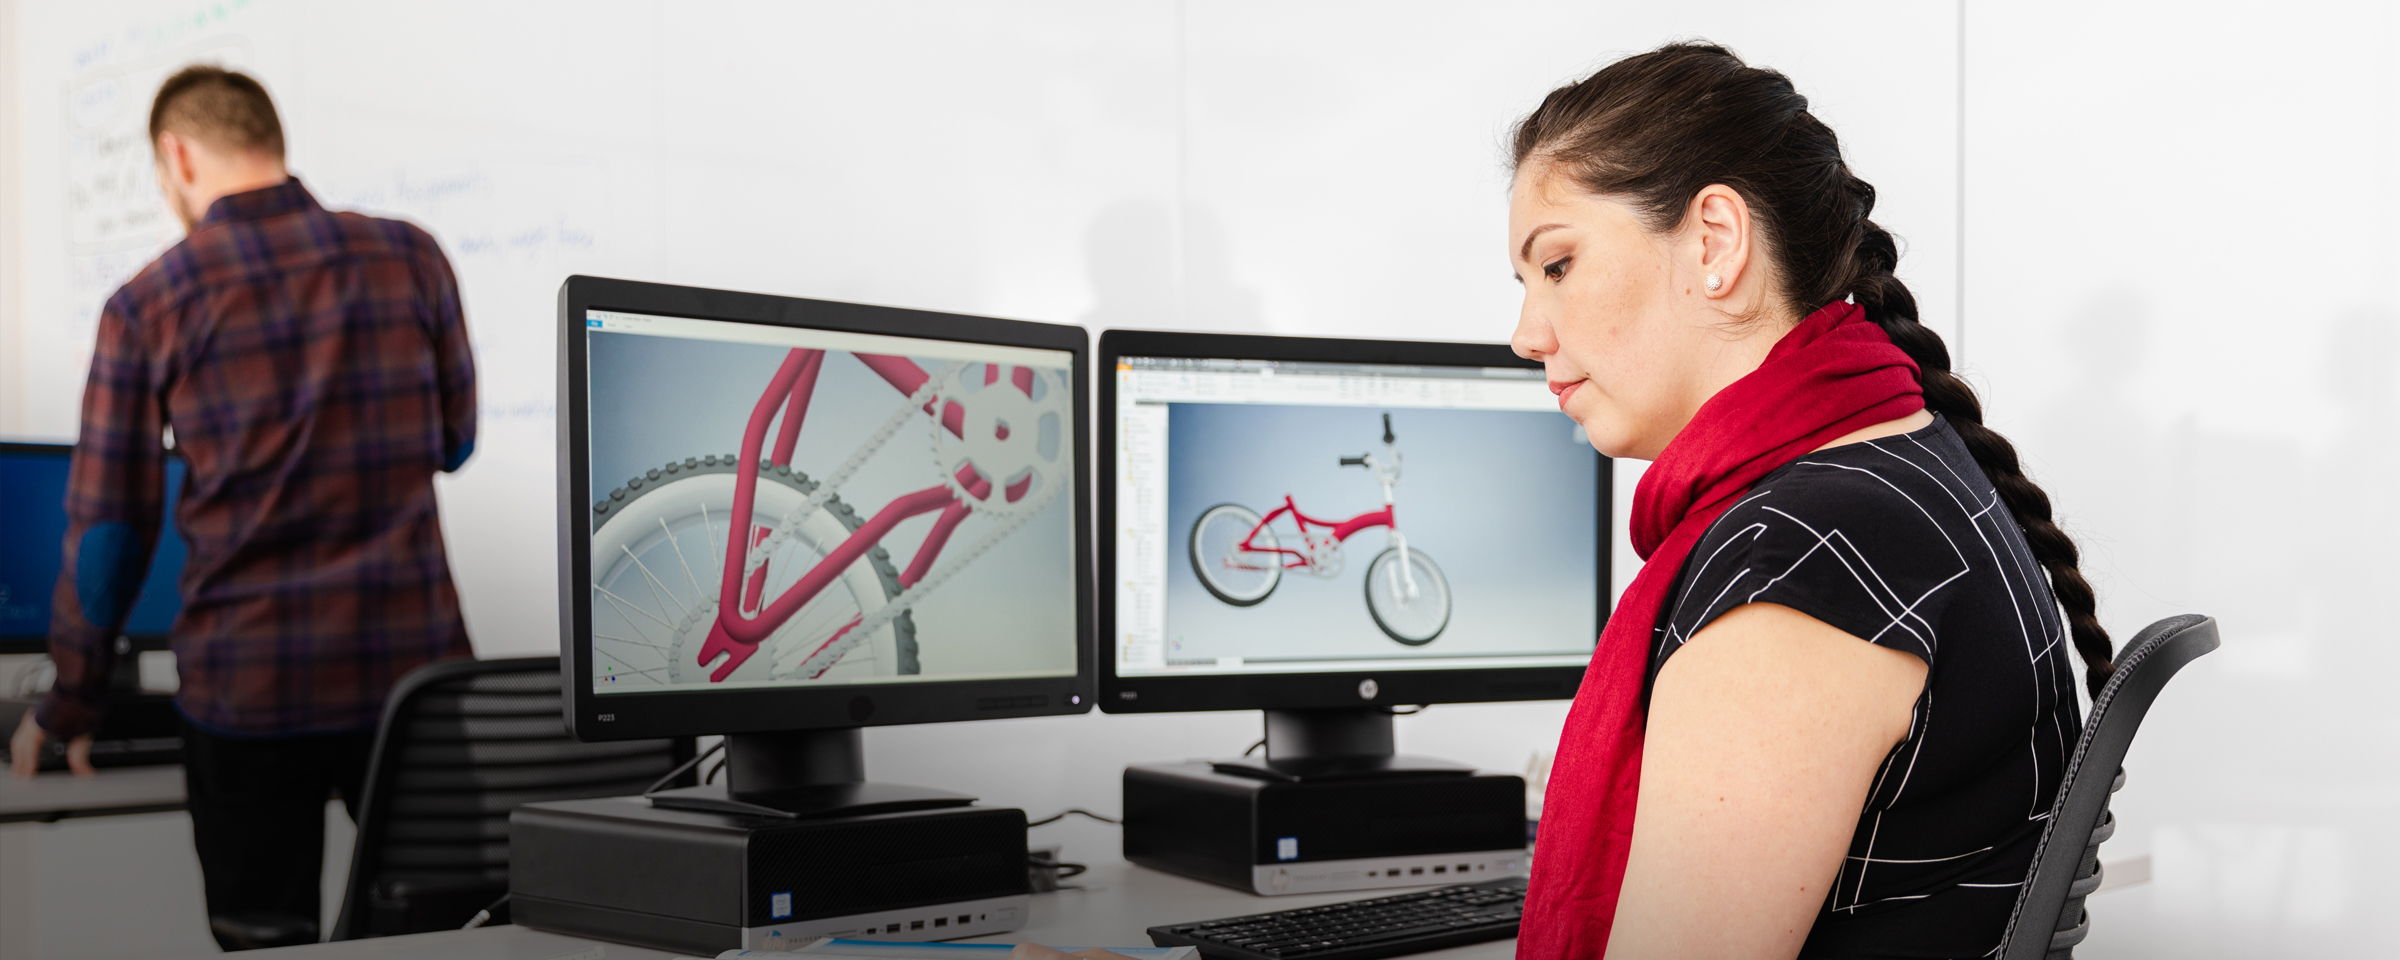 Woman working with CAD files on two monitors